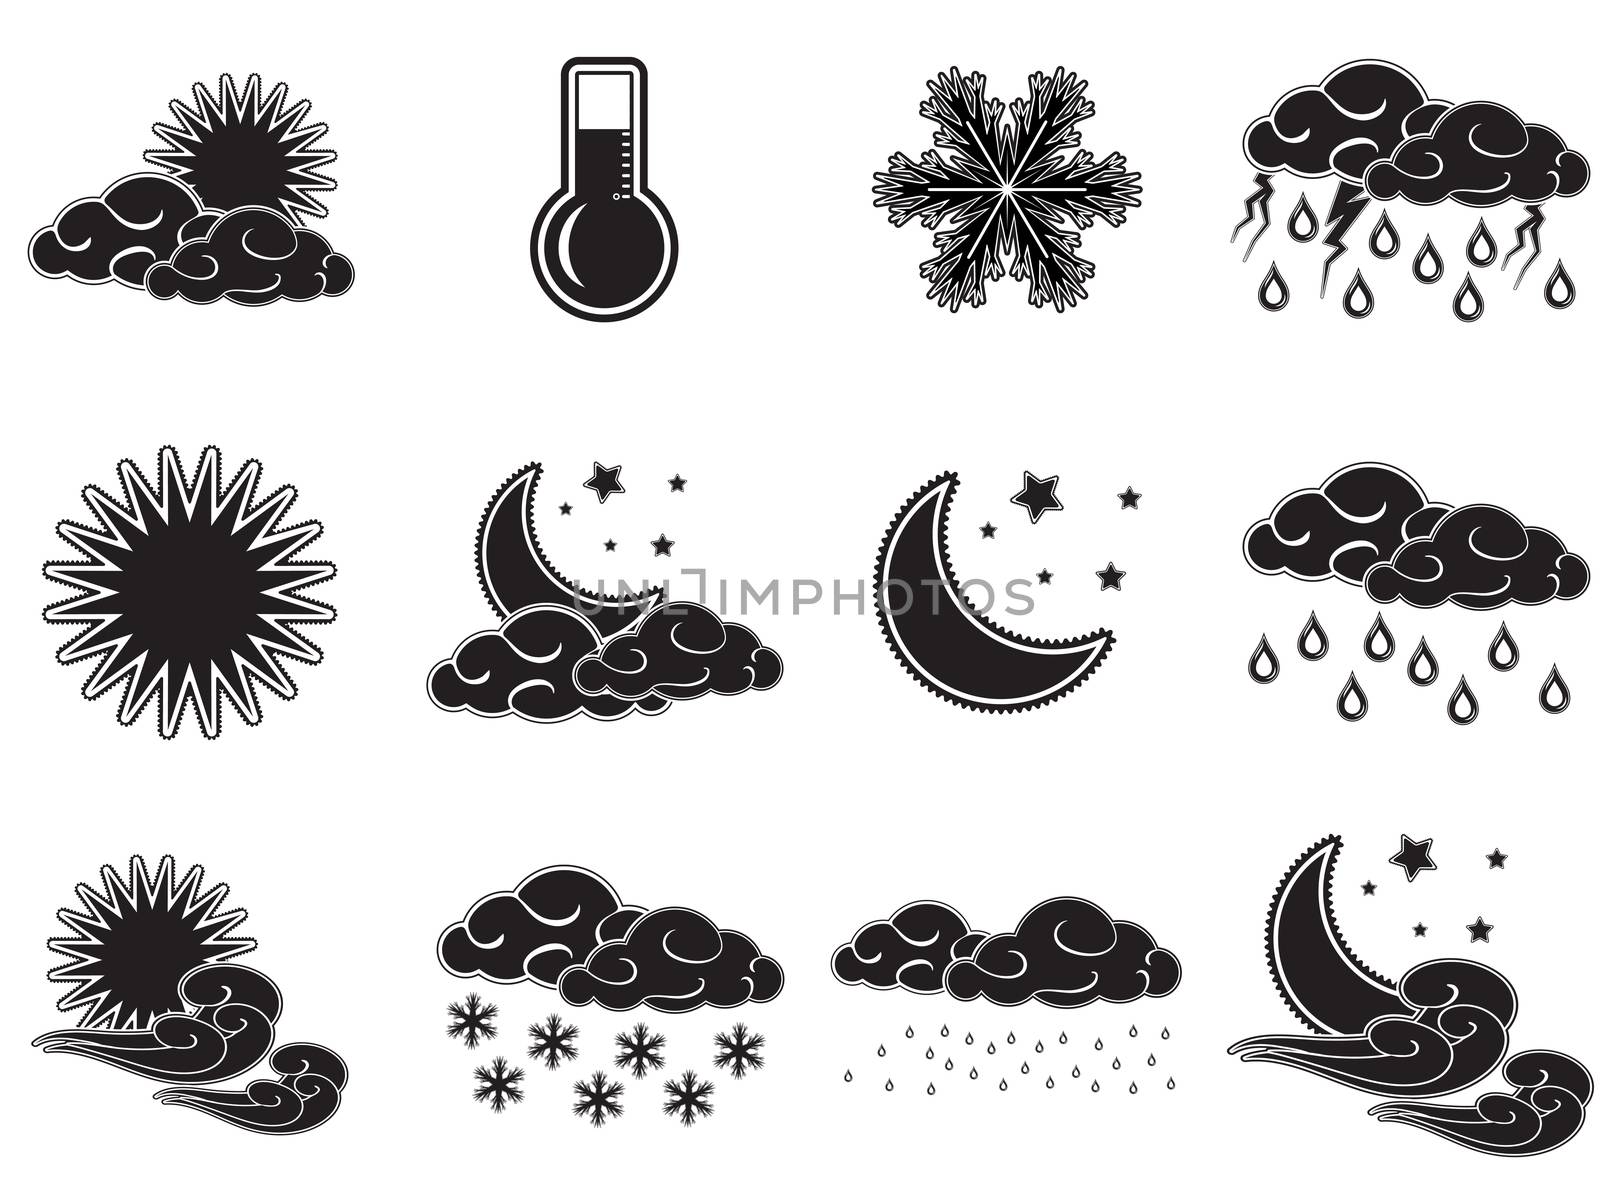 Night day weather colour icons set black isolated on white background.